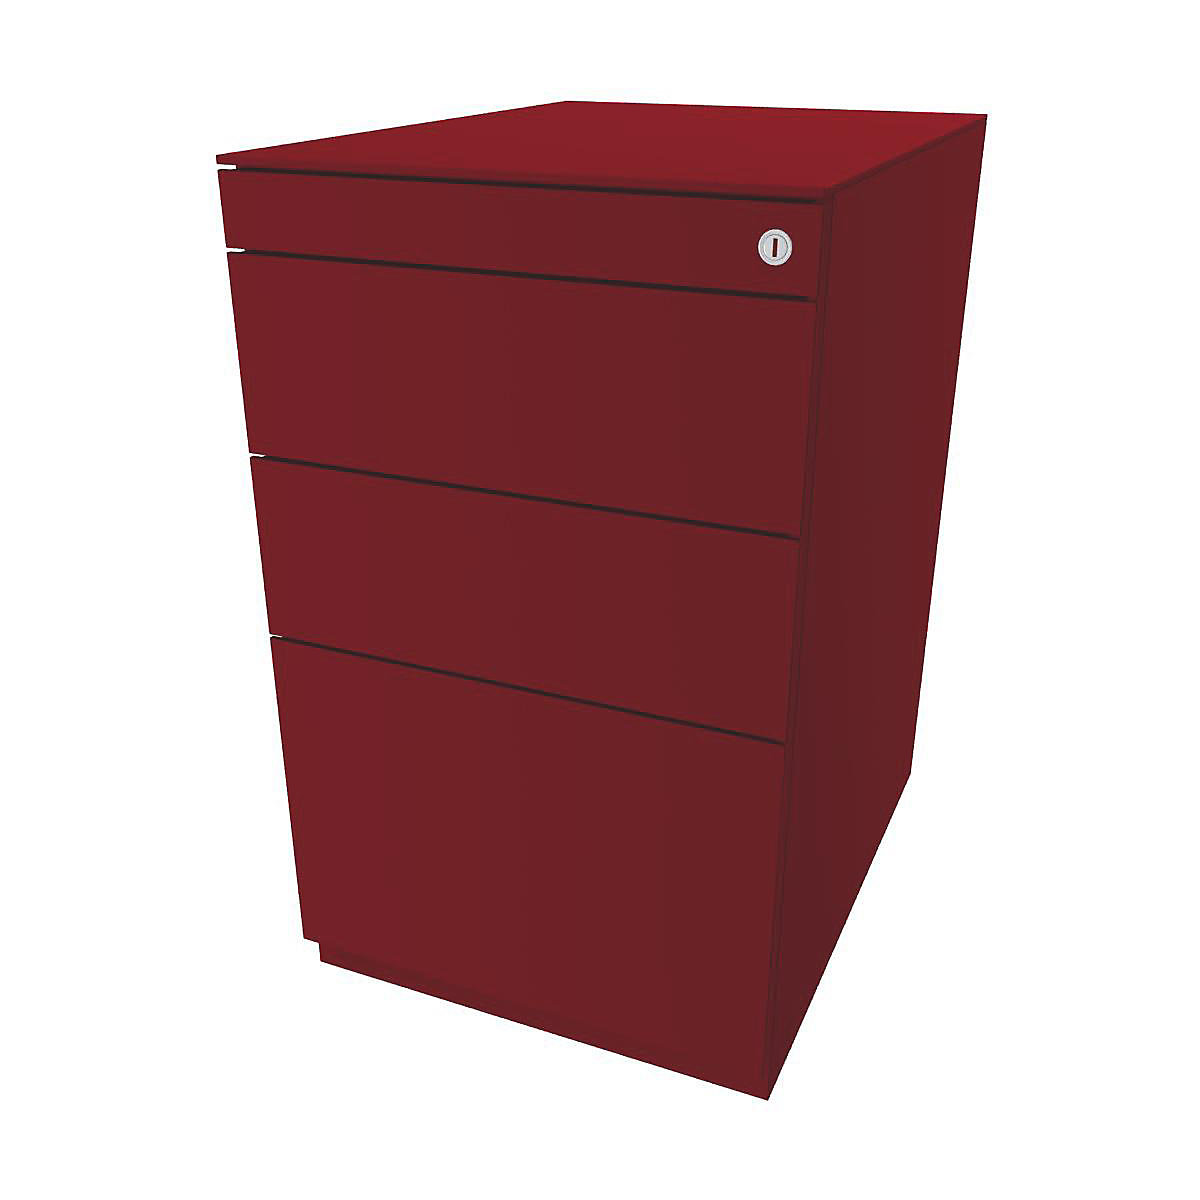 Note™ fixed pedestal, with 2 universal drawers, 1 suspension file drawer – BISLEY, with top, depth 565 mm, cardinal red-8